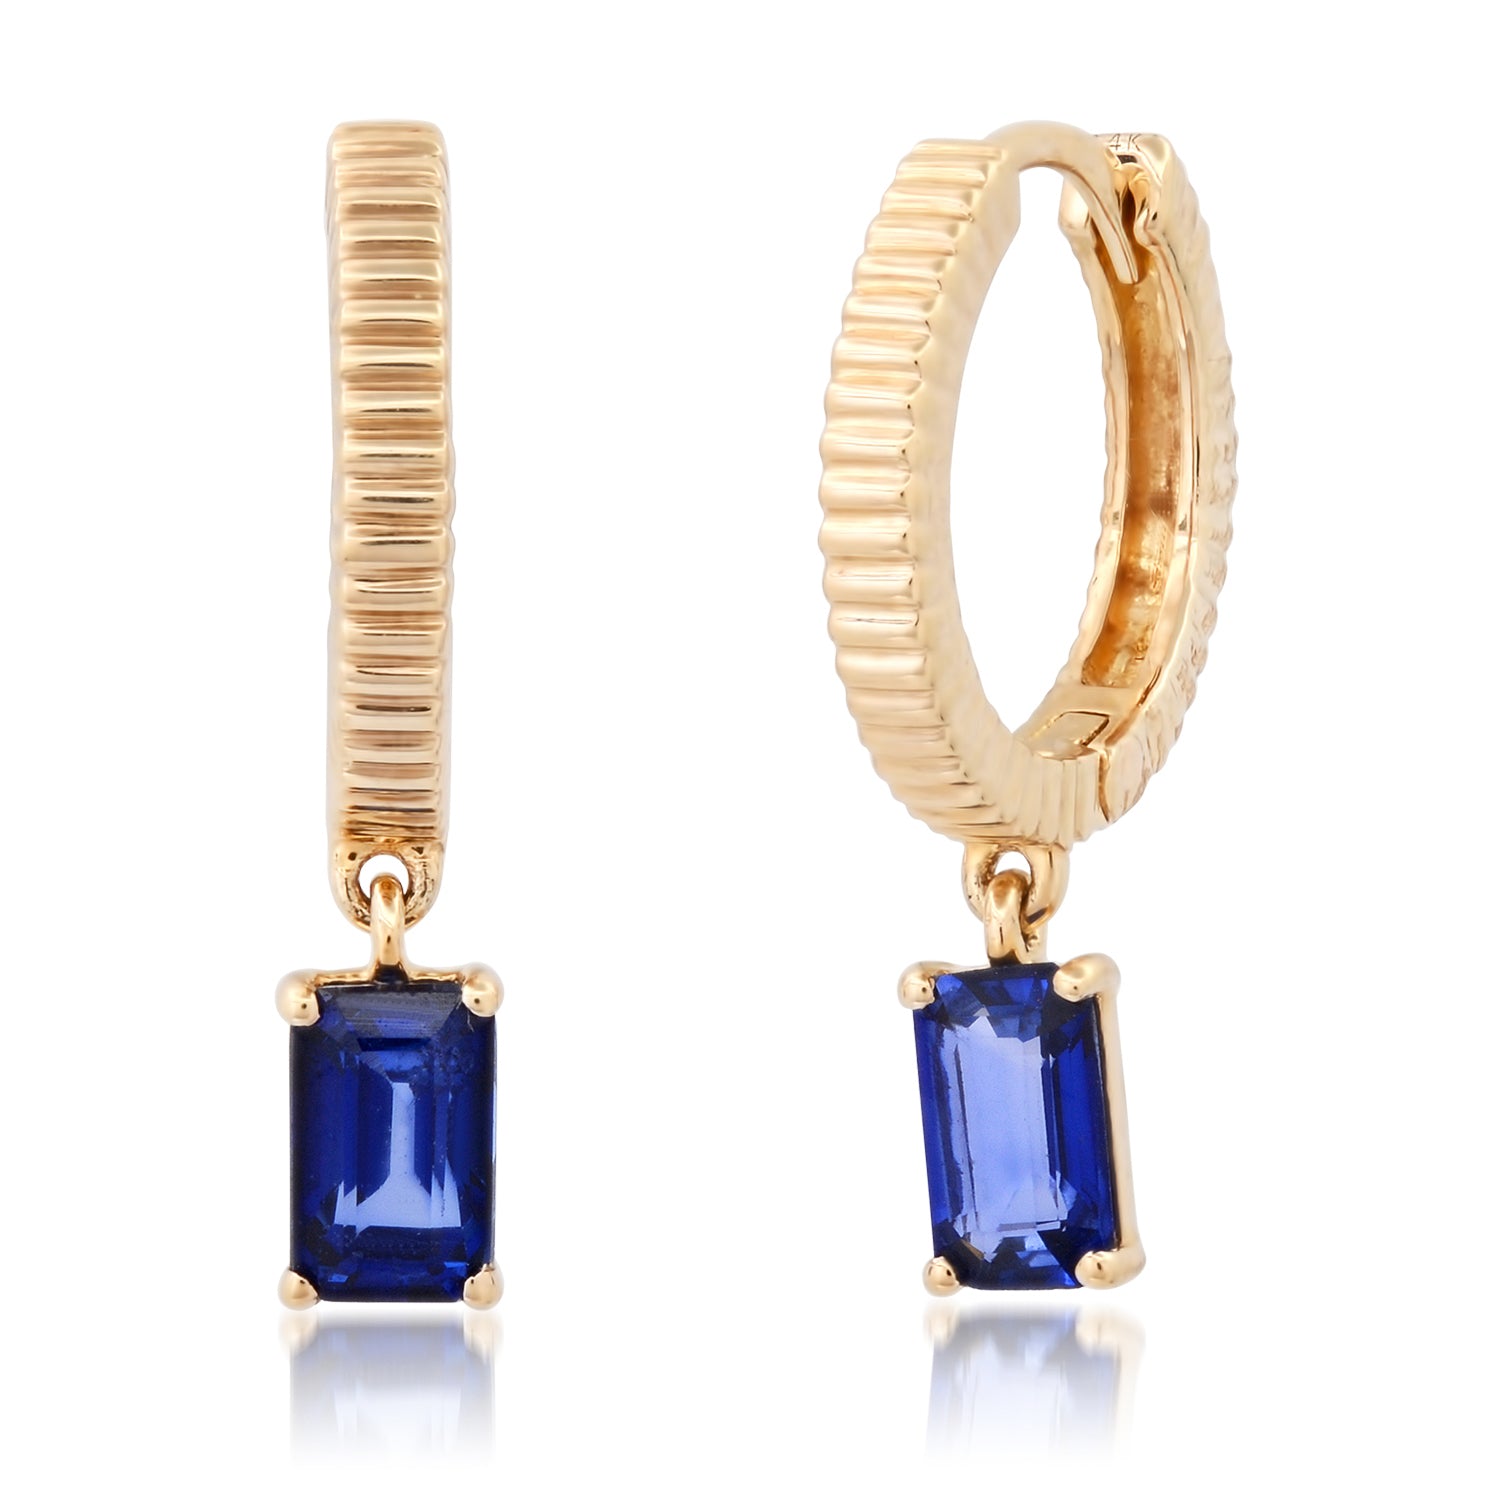 Fluted Huggie Earrings with Emerald Cut Sapphire Drop